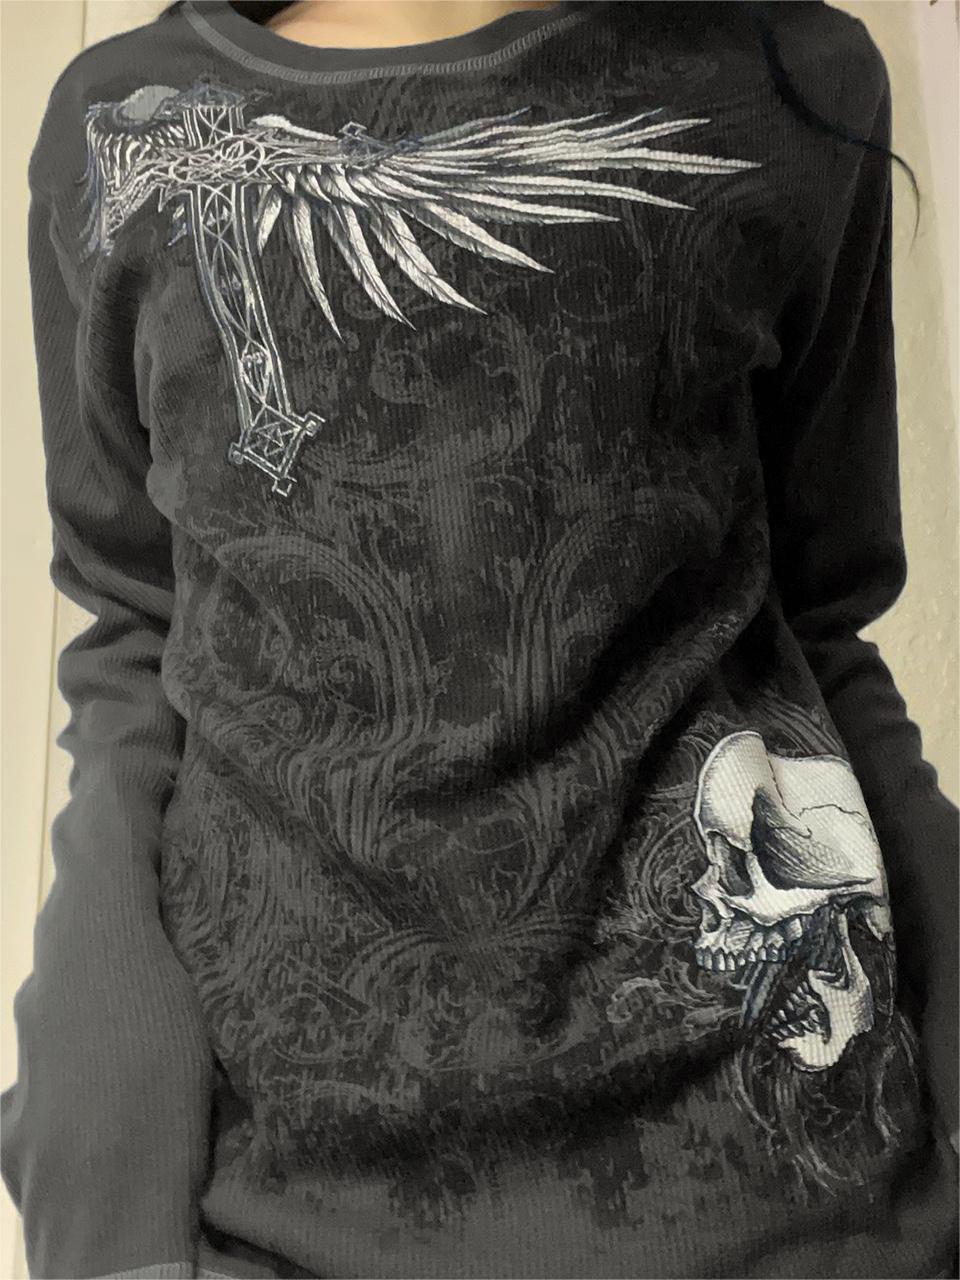 Vintage Punk Long Sleeve Knit Top with Skull Print